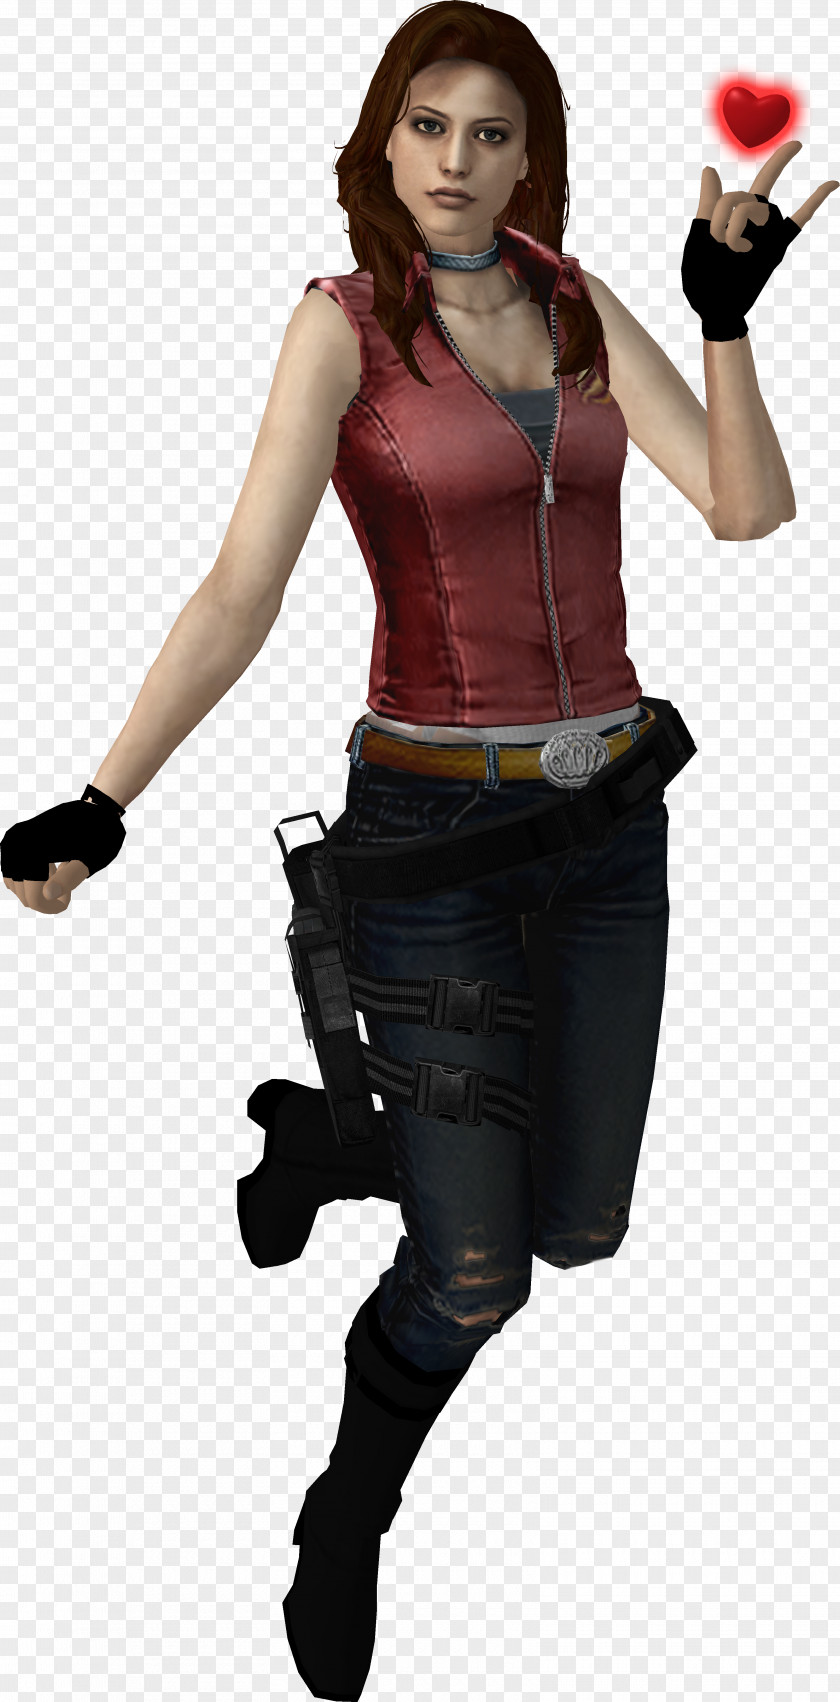 Milla Jovovich Claire Redfield Resident Evil 2 6 Evil: Revelations PNG